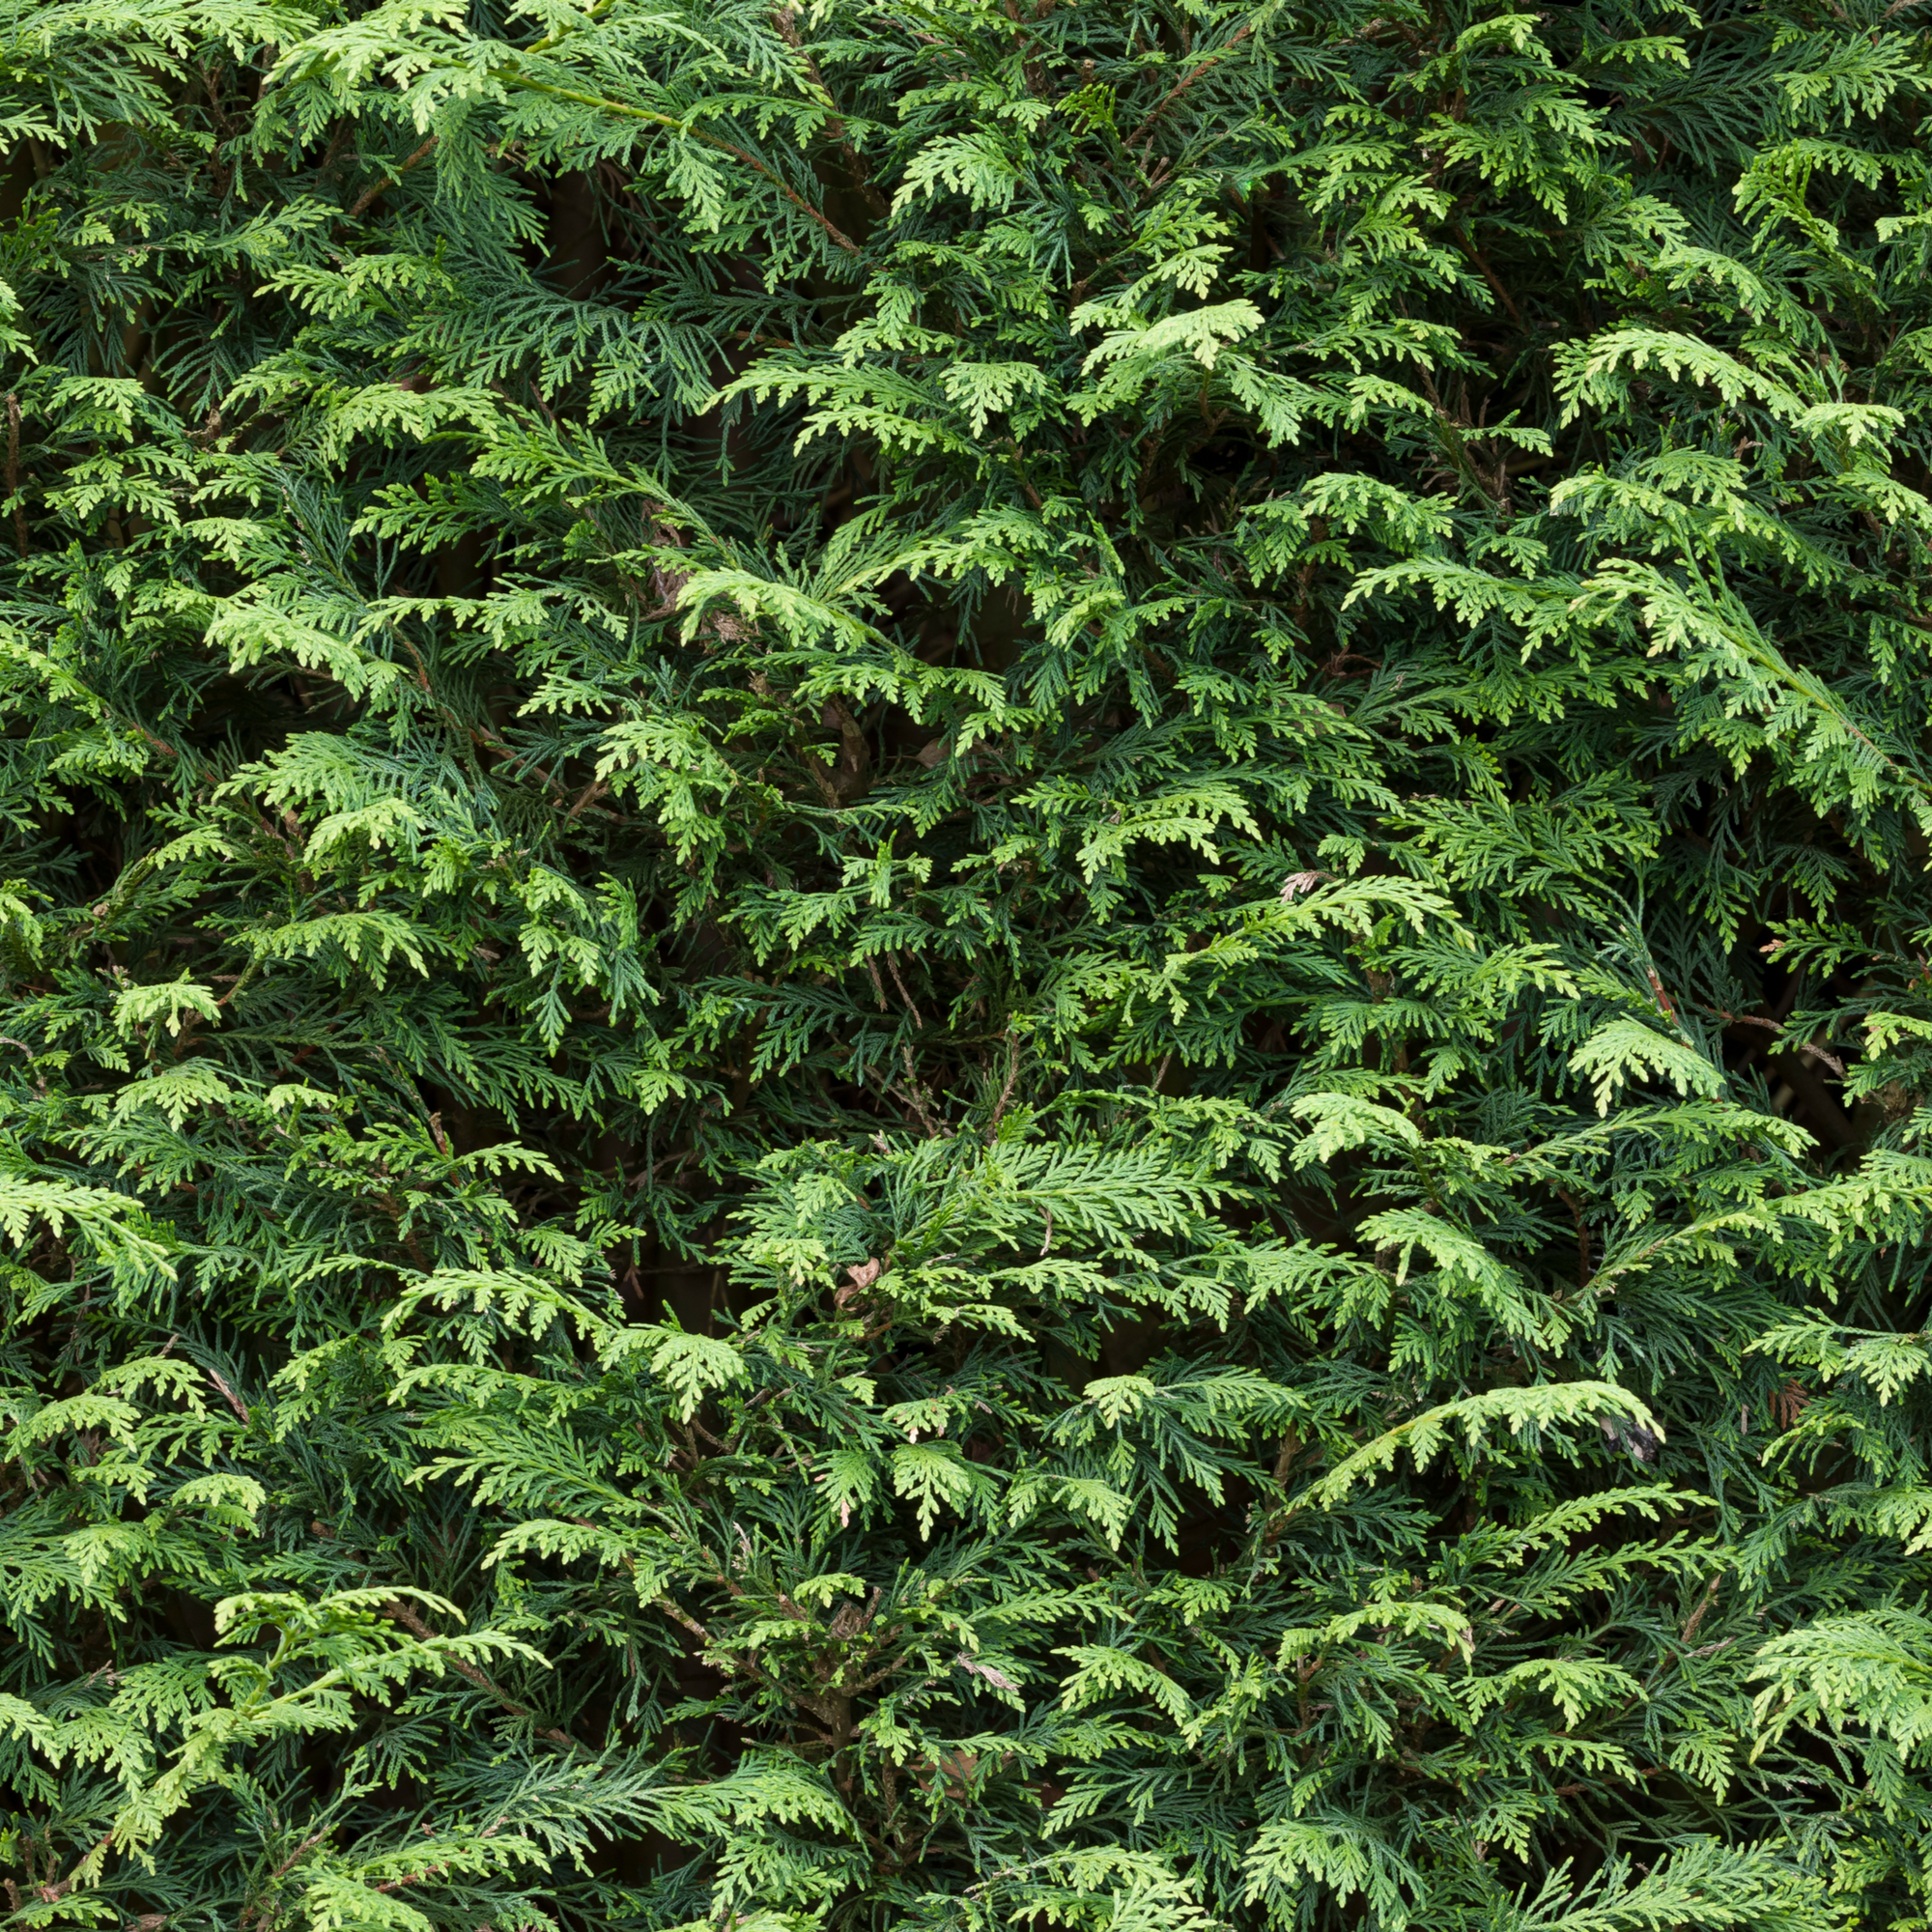 Potted Green Leylandii Hedging Conifers (Multi-buy Offers Available)